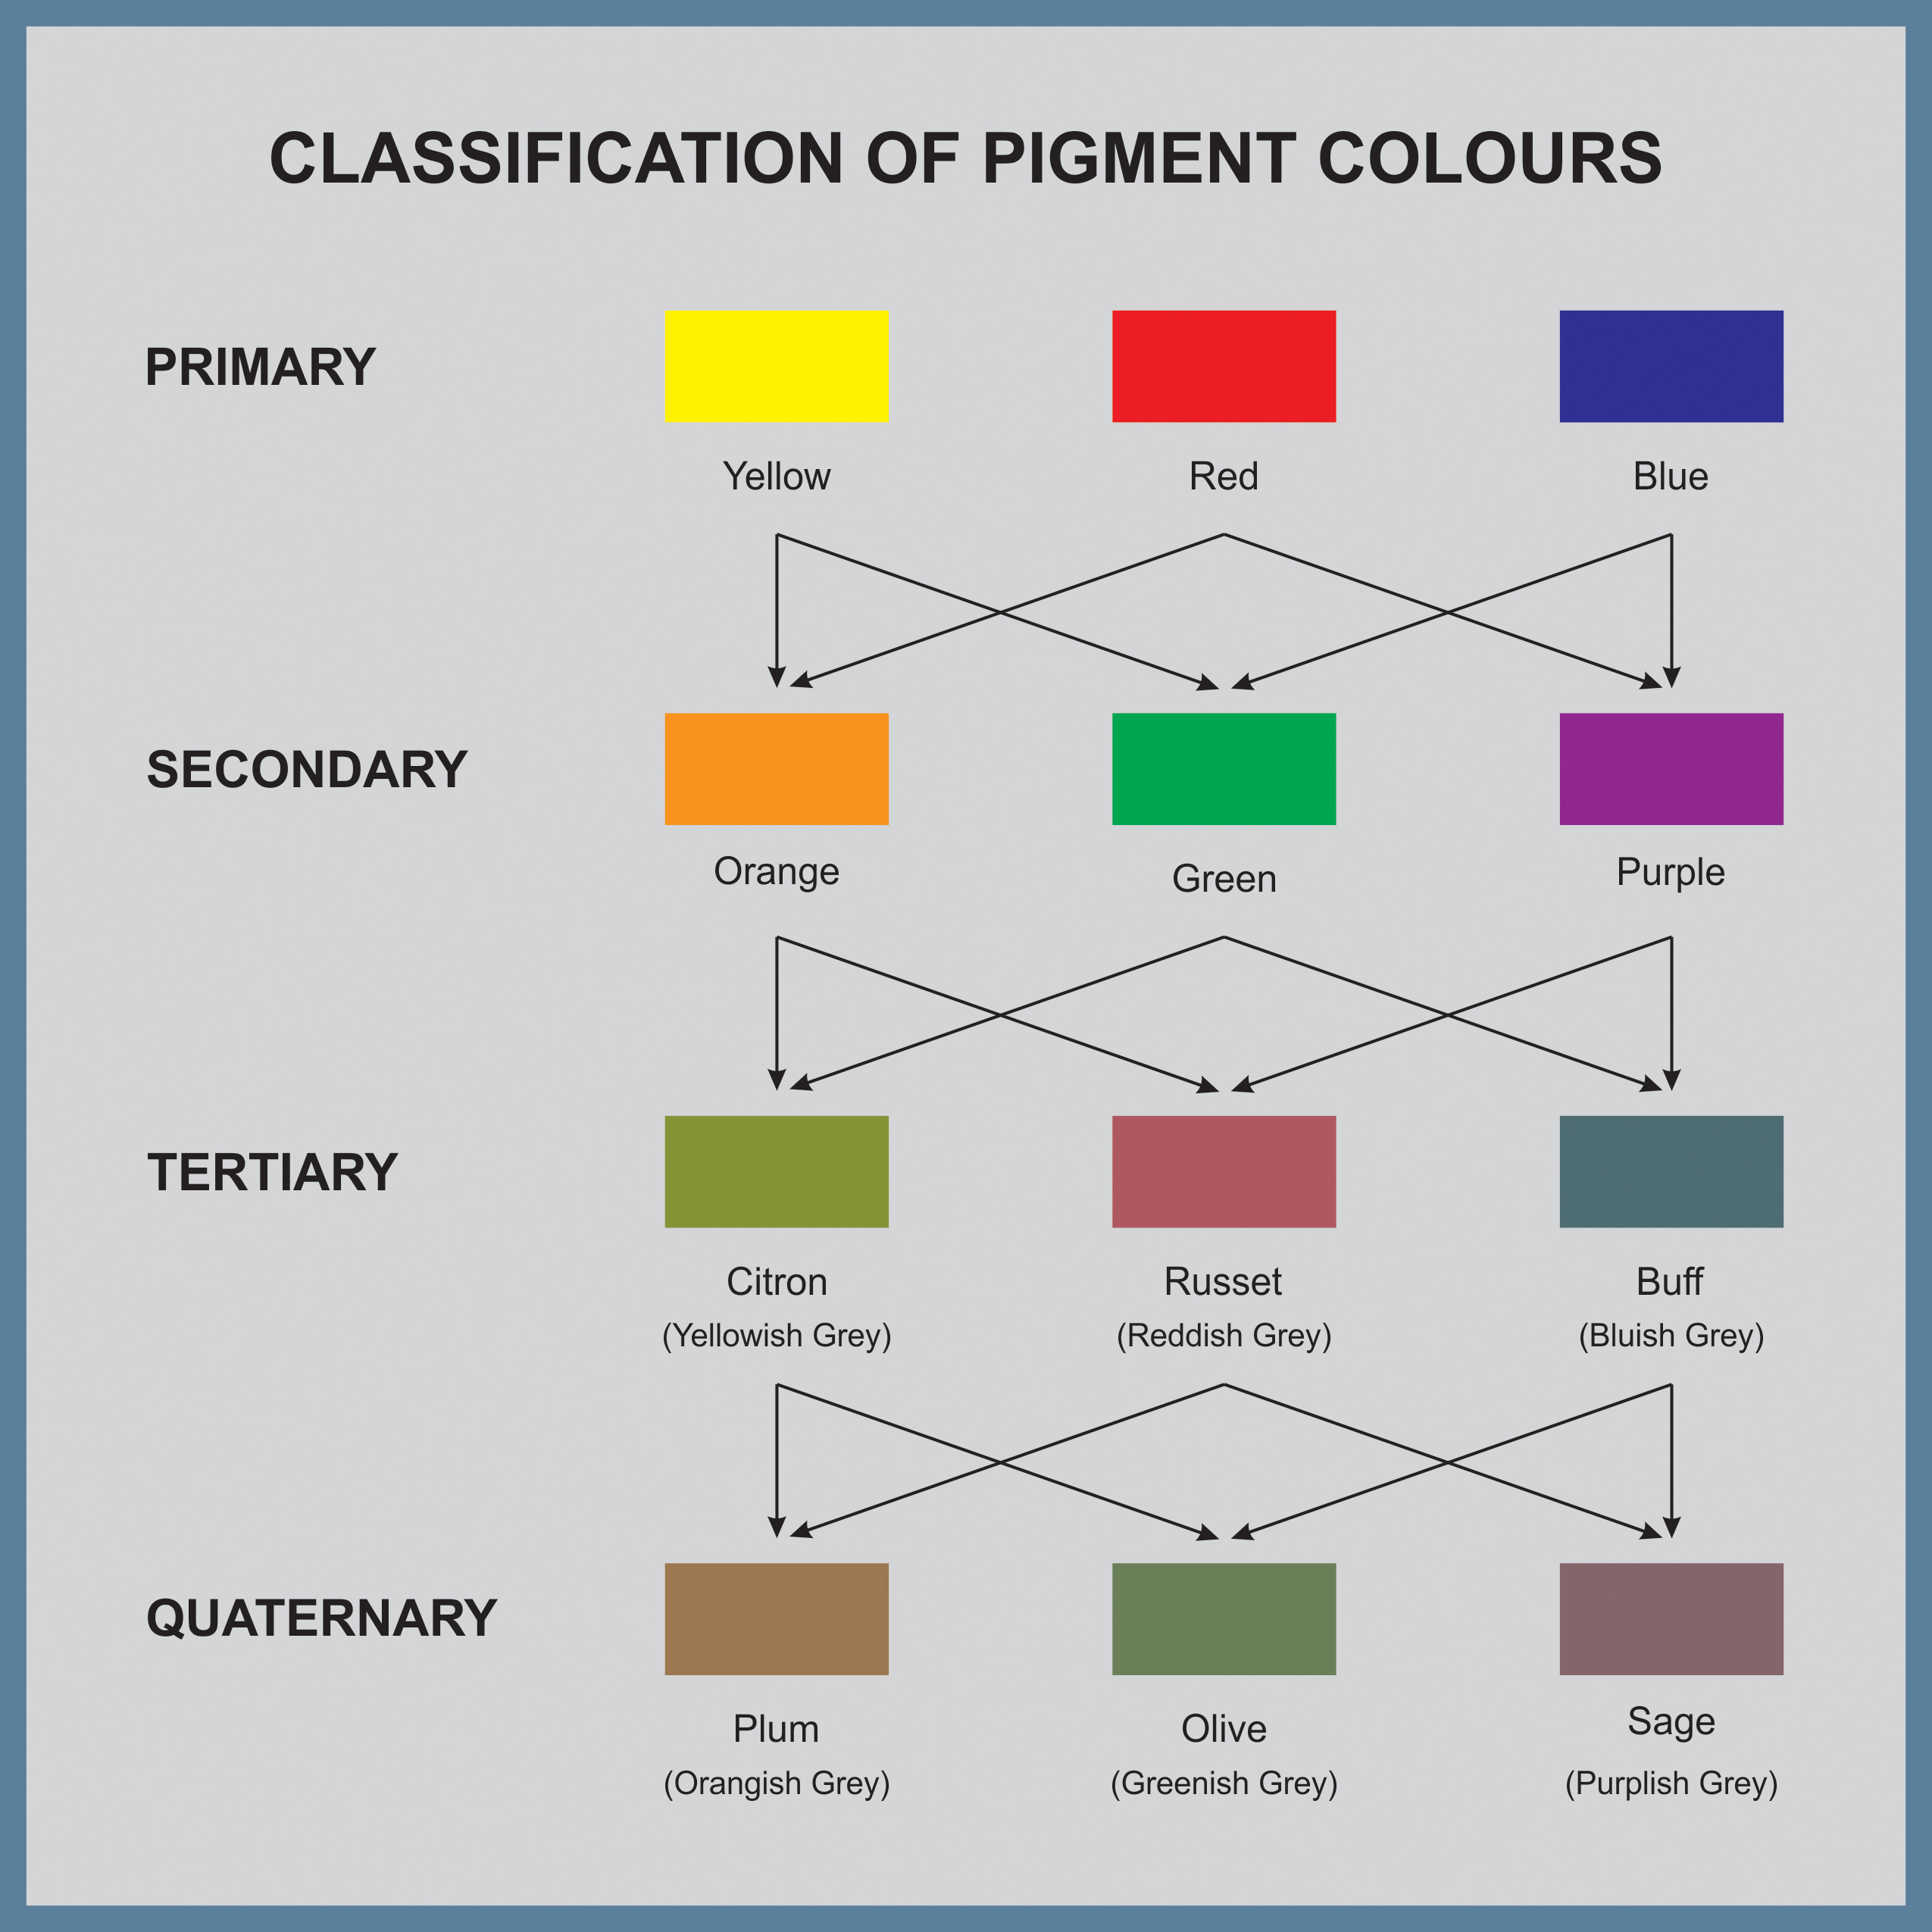 COLORs: What is it about?